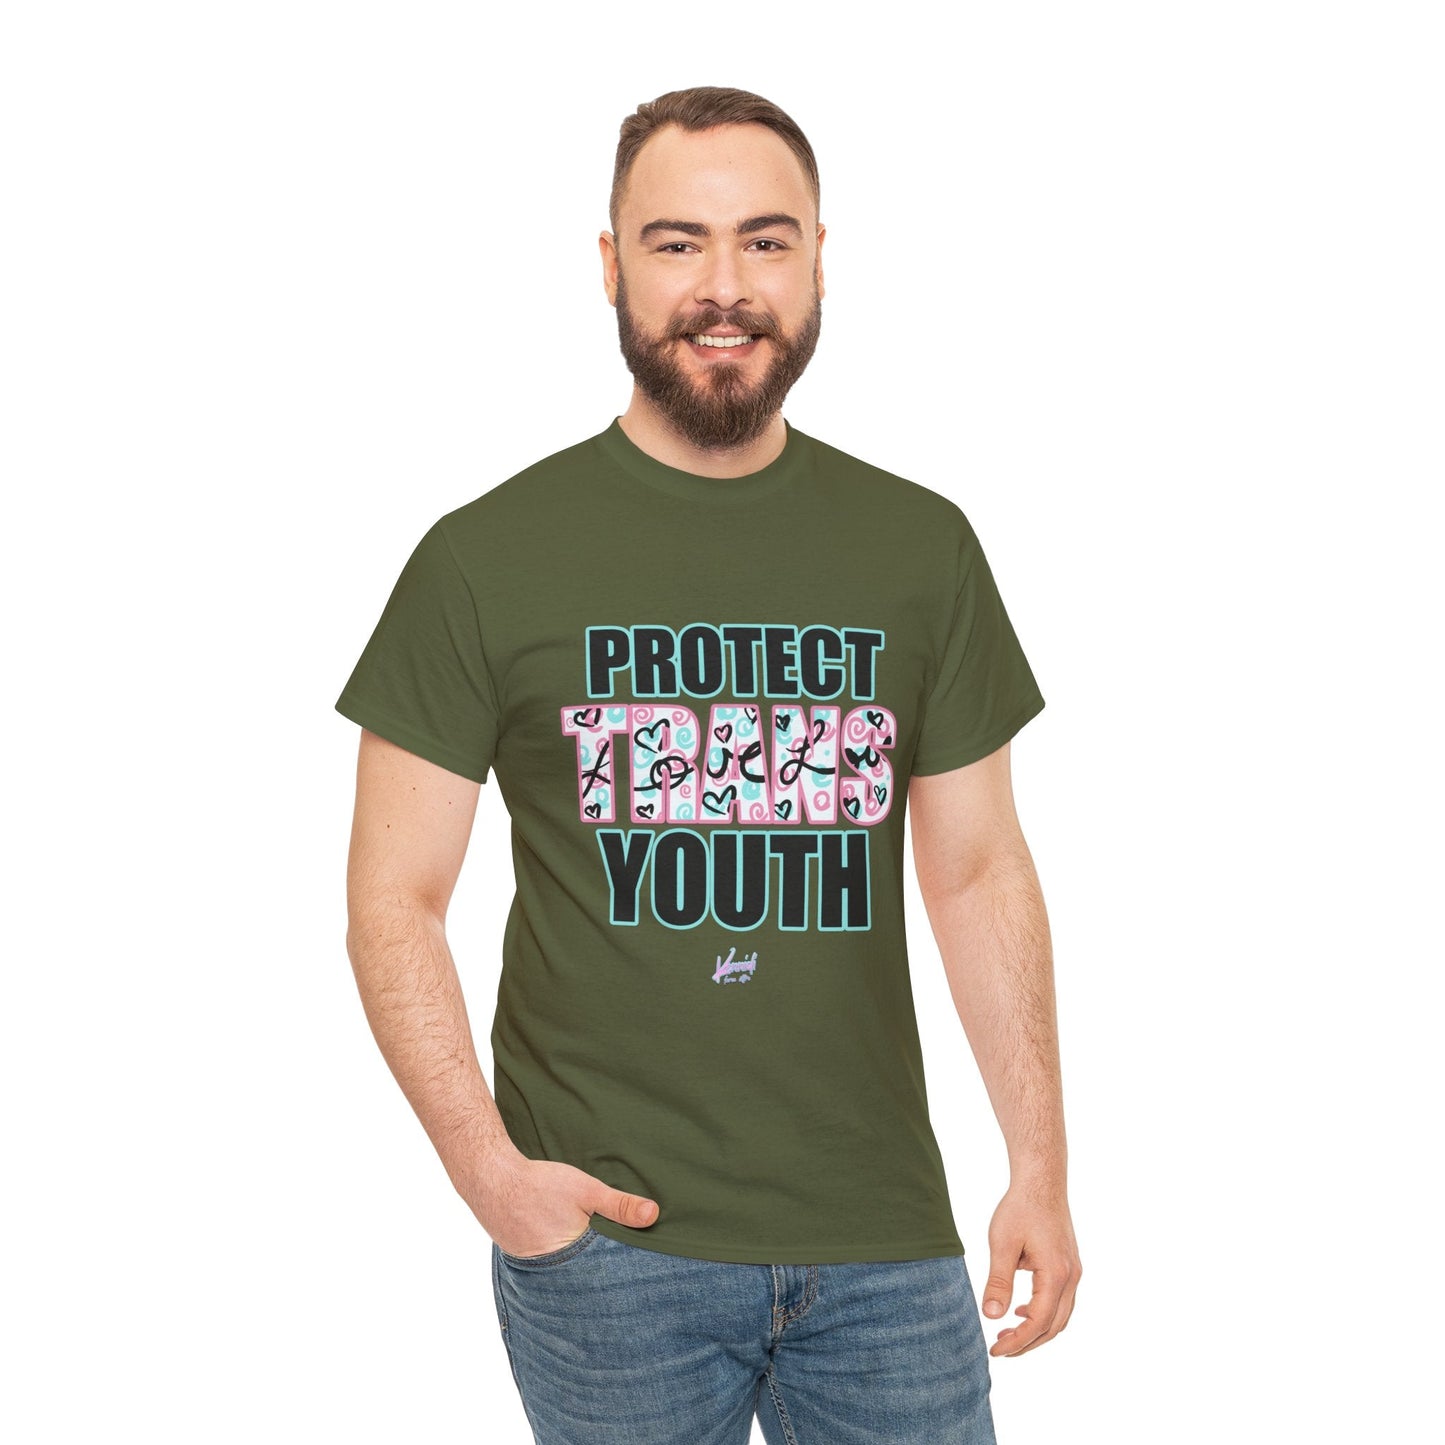 Protect Trans Youth Love 3.0 Unisex Heavy Cotton Tee - Military Green / S T - Shirt